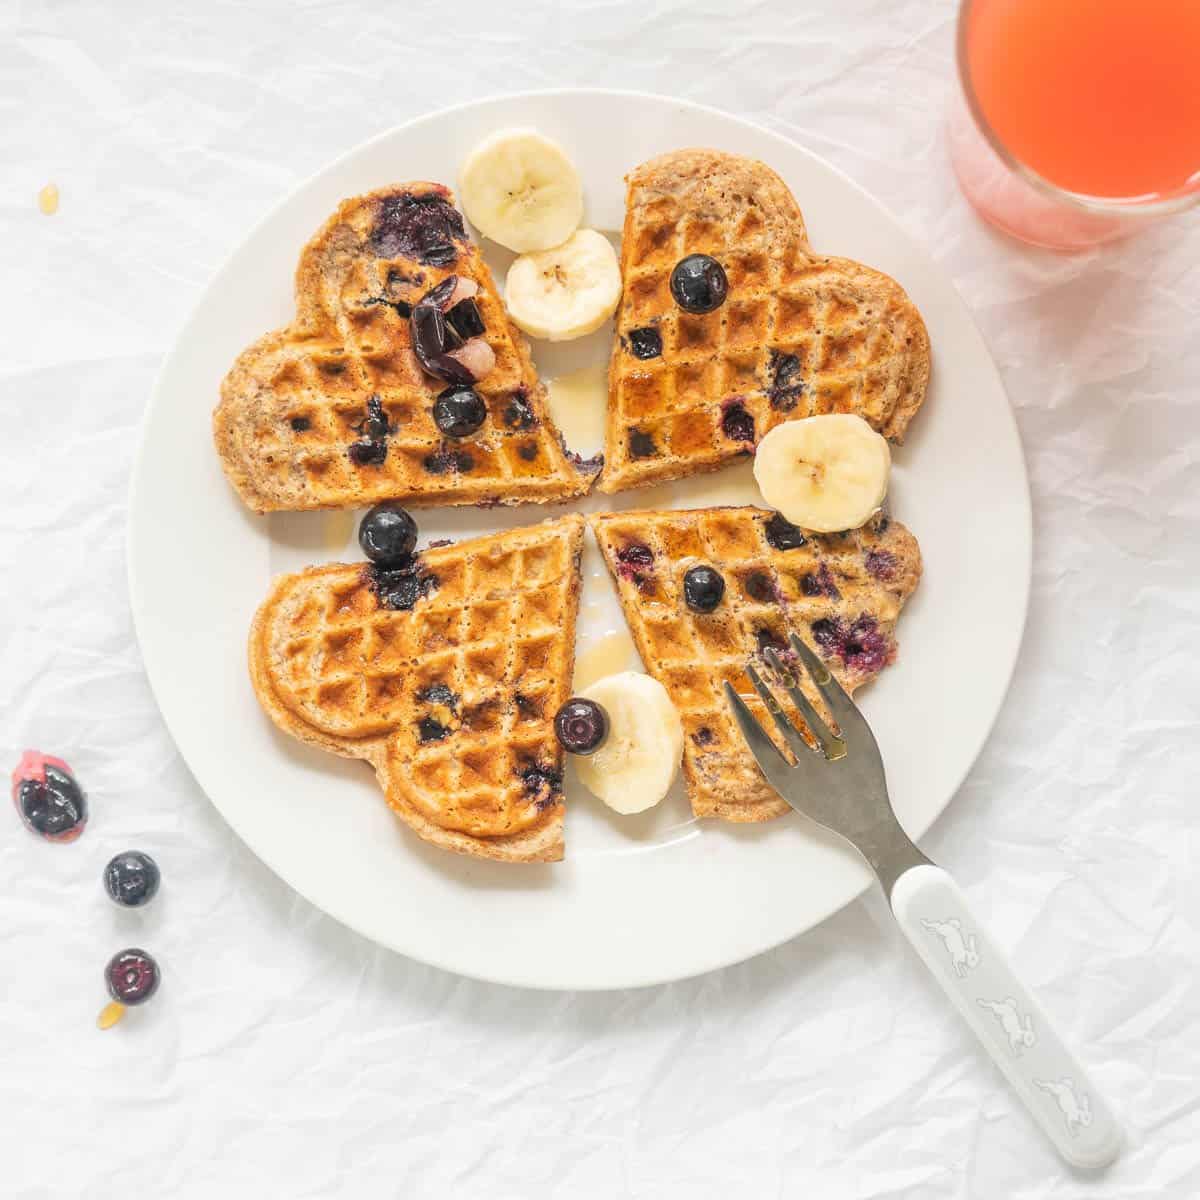 4 heart shaped waffles on a white plate scattered with banana slices and blieberries. 